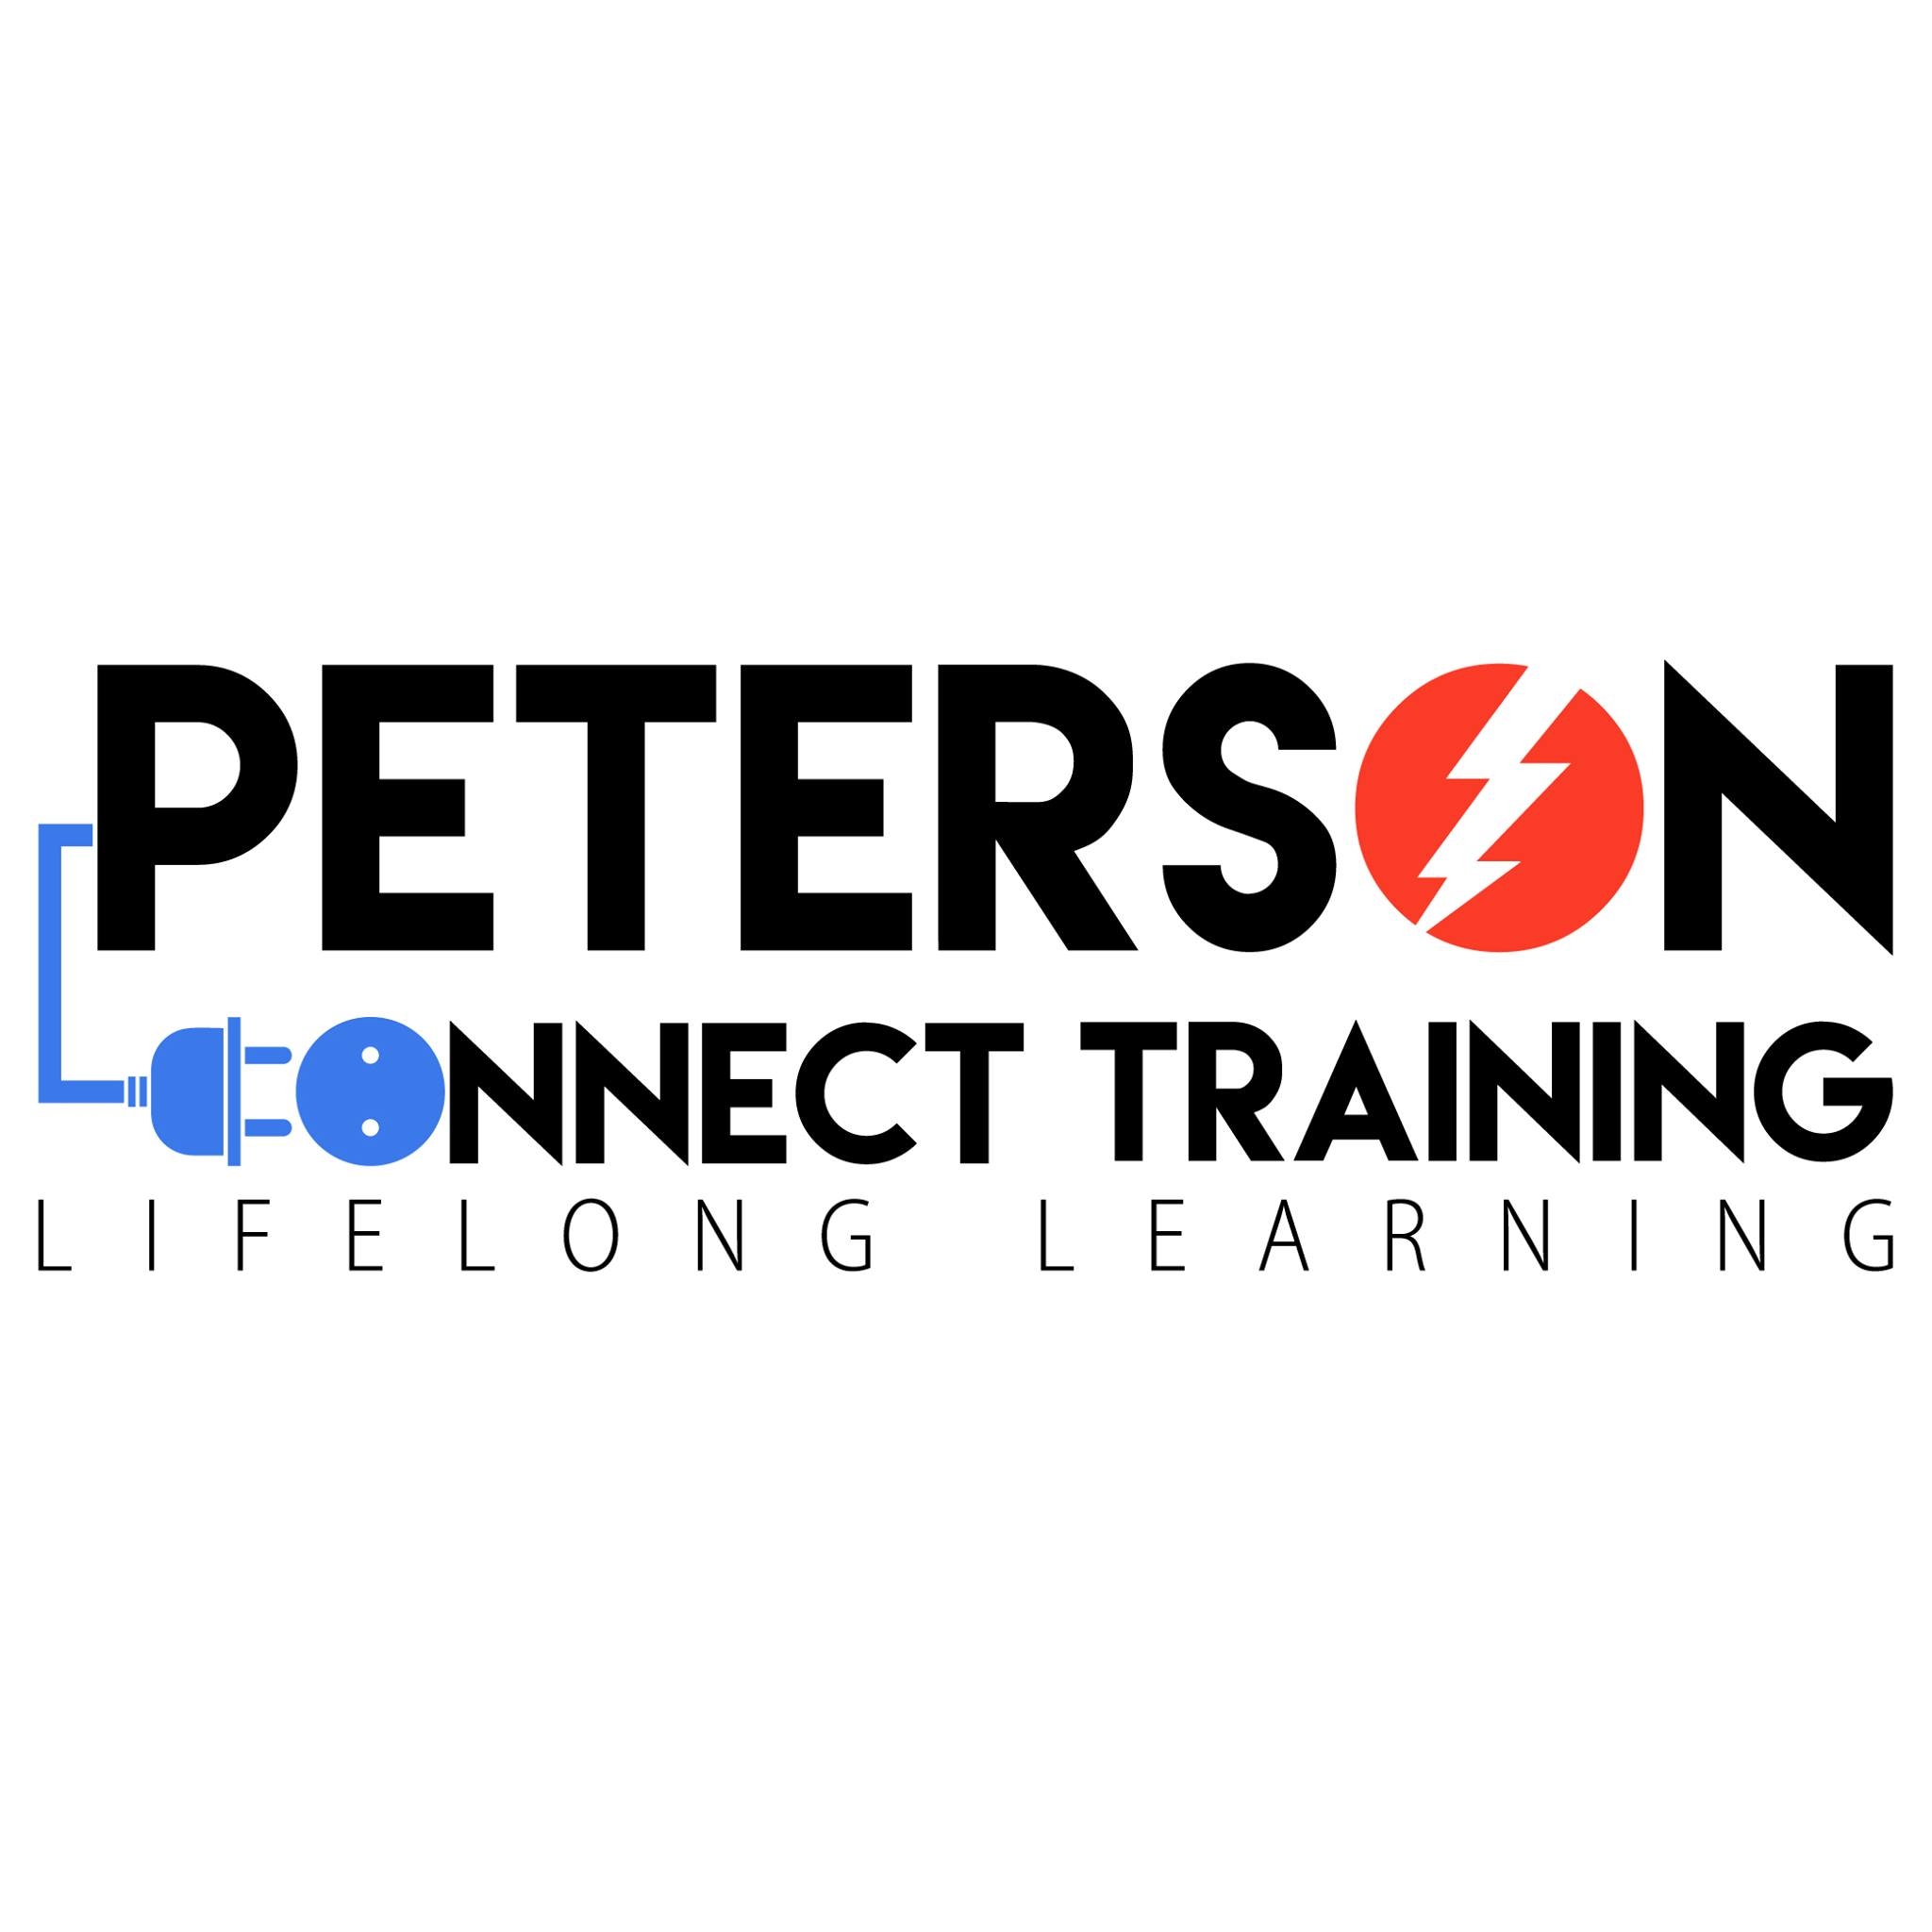 Peterson Connect Training